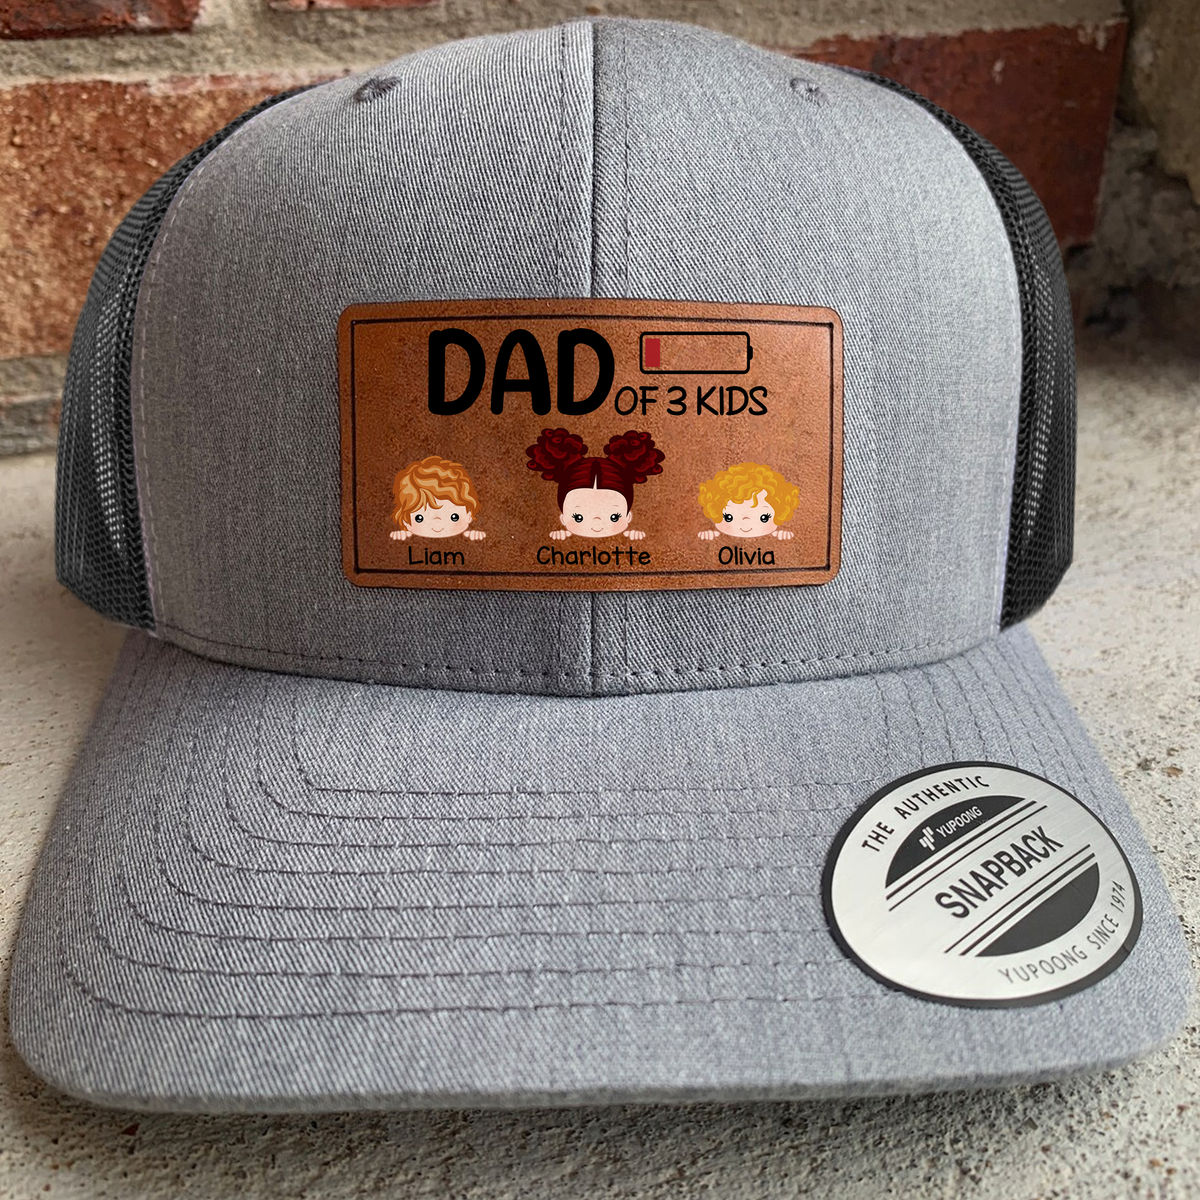 Dad Hats - Dad Of Kid - Personalized Cap Ver 2 - Gifts For Him, Dad, Family Members, Father's Day Gifts, Birthday, Xmas Gifts_3